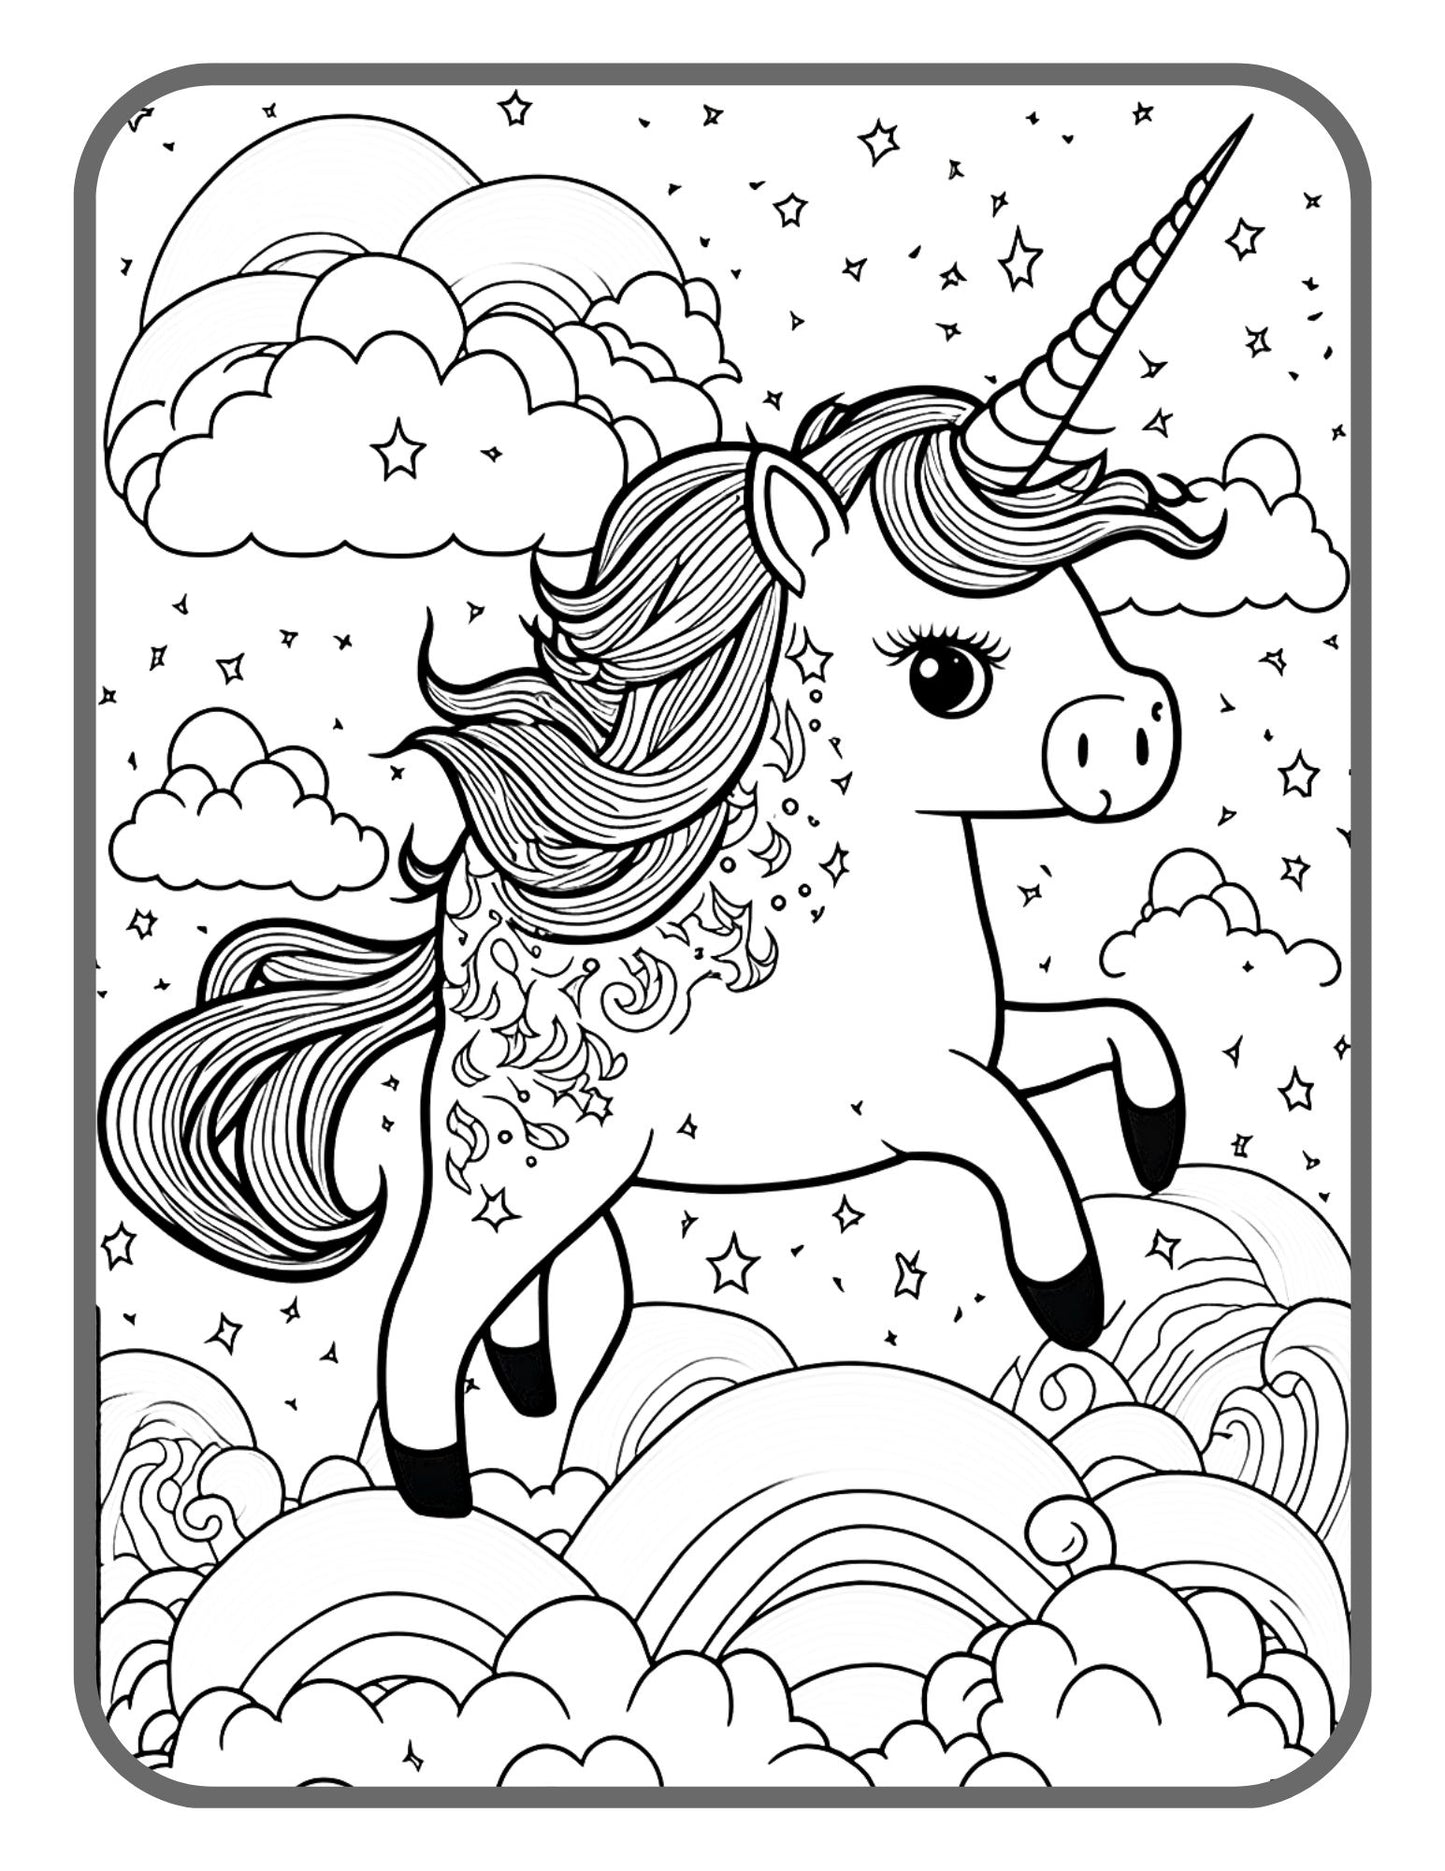 Unicorn Birthday Gift Activity Coloring Book Cute Animal Unicorn Horse Coloring Book Unicorn Coloring Books For Girls Boys Kids Adult Gift